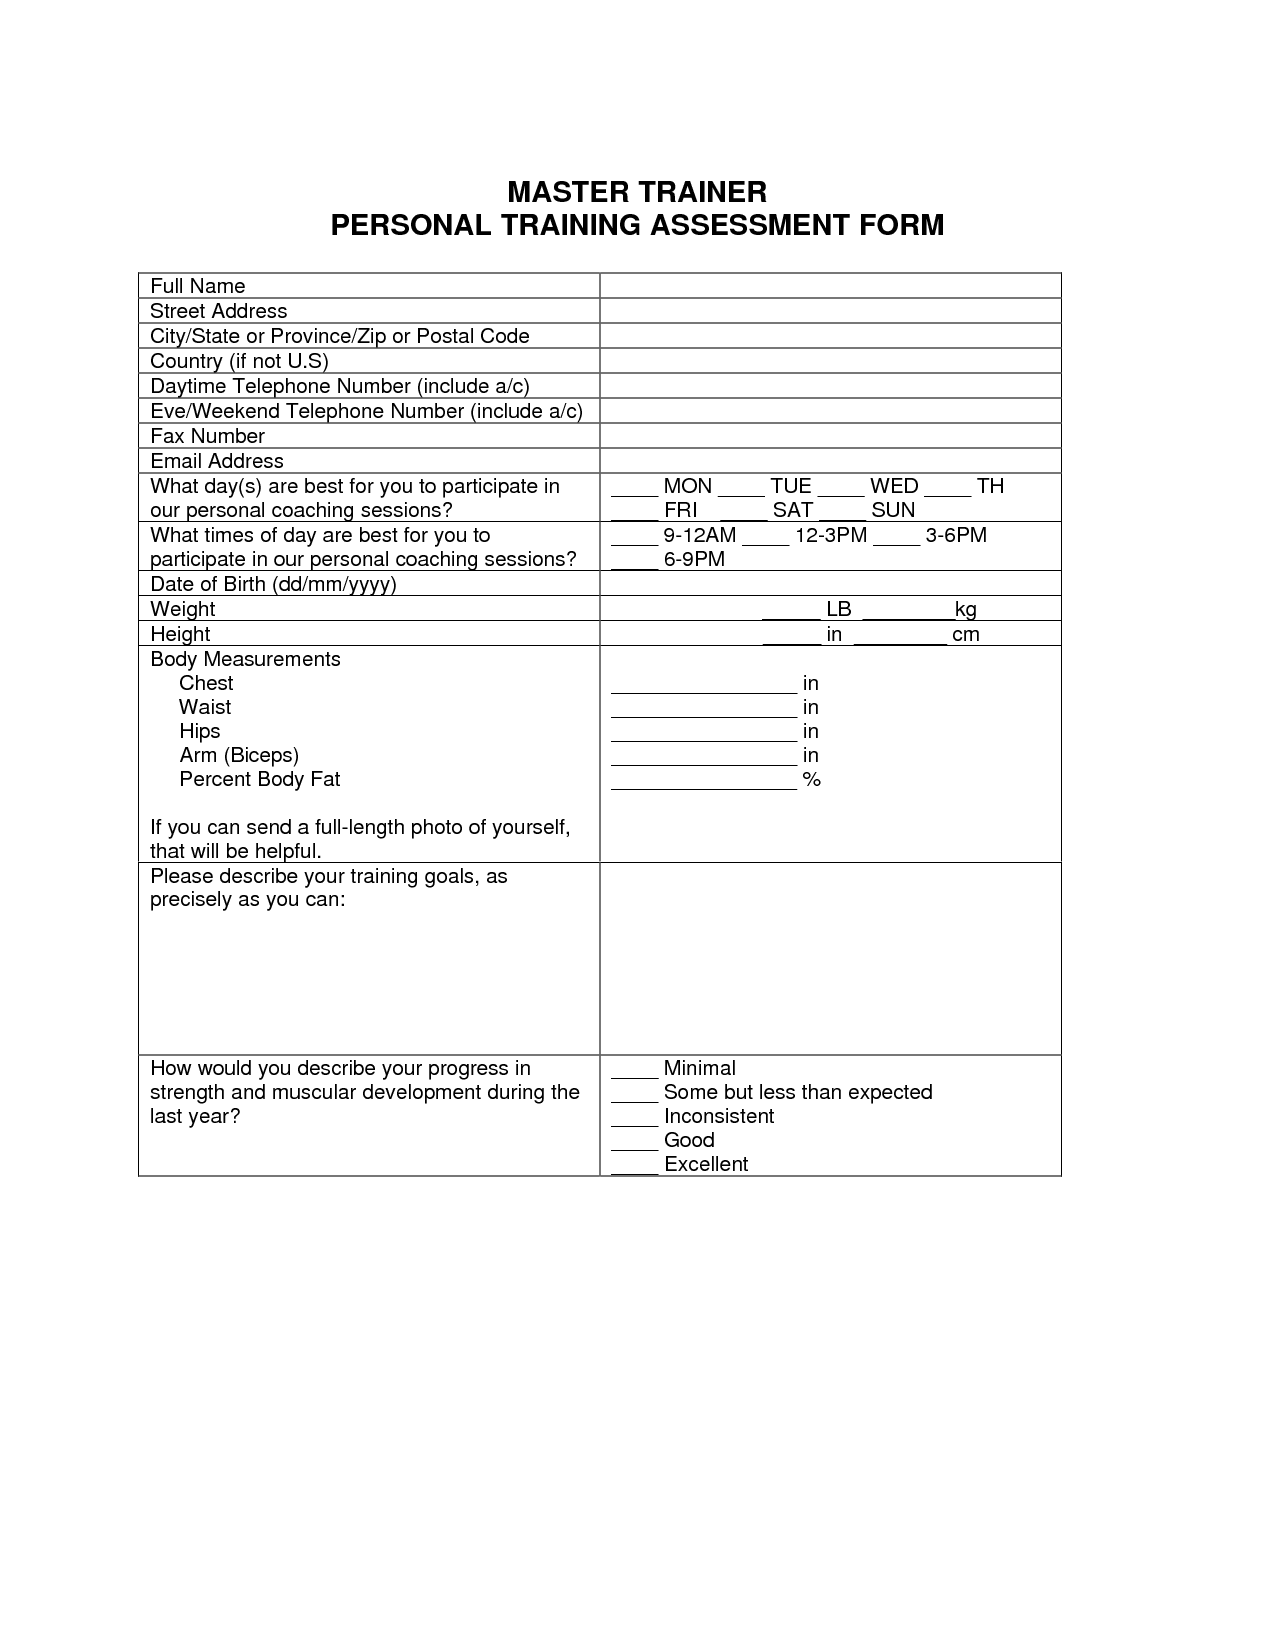 personal-trainer-forms-free-printable-documents